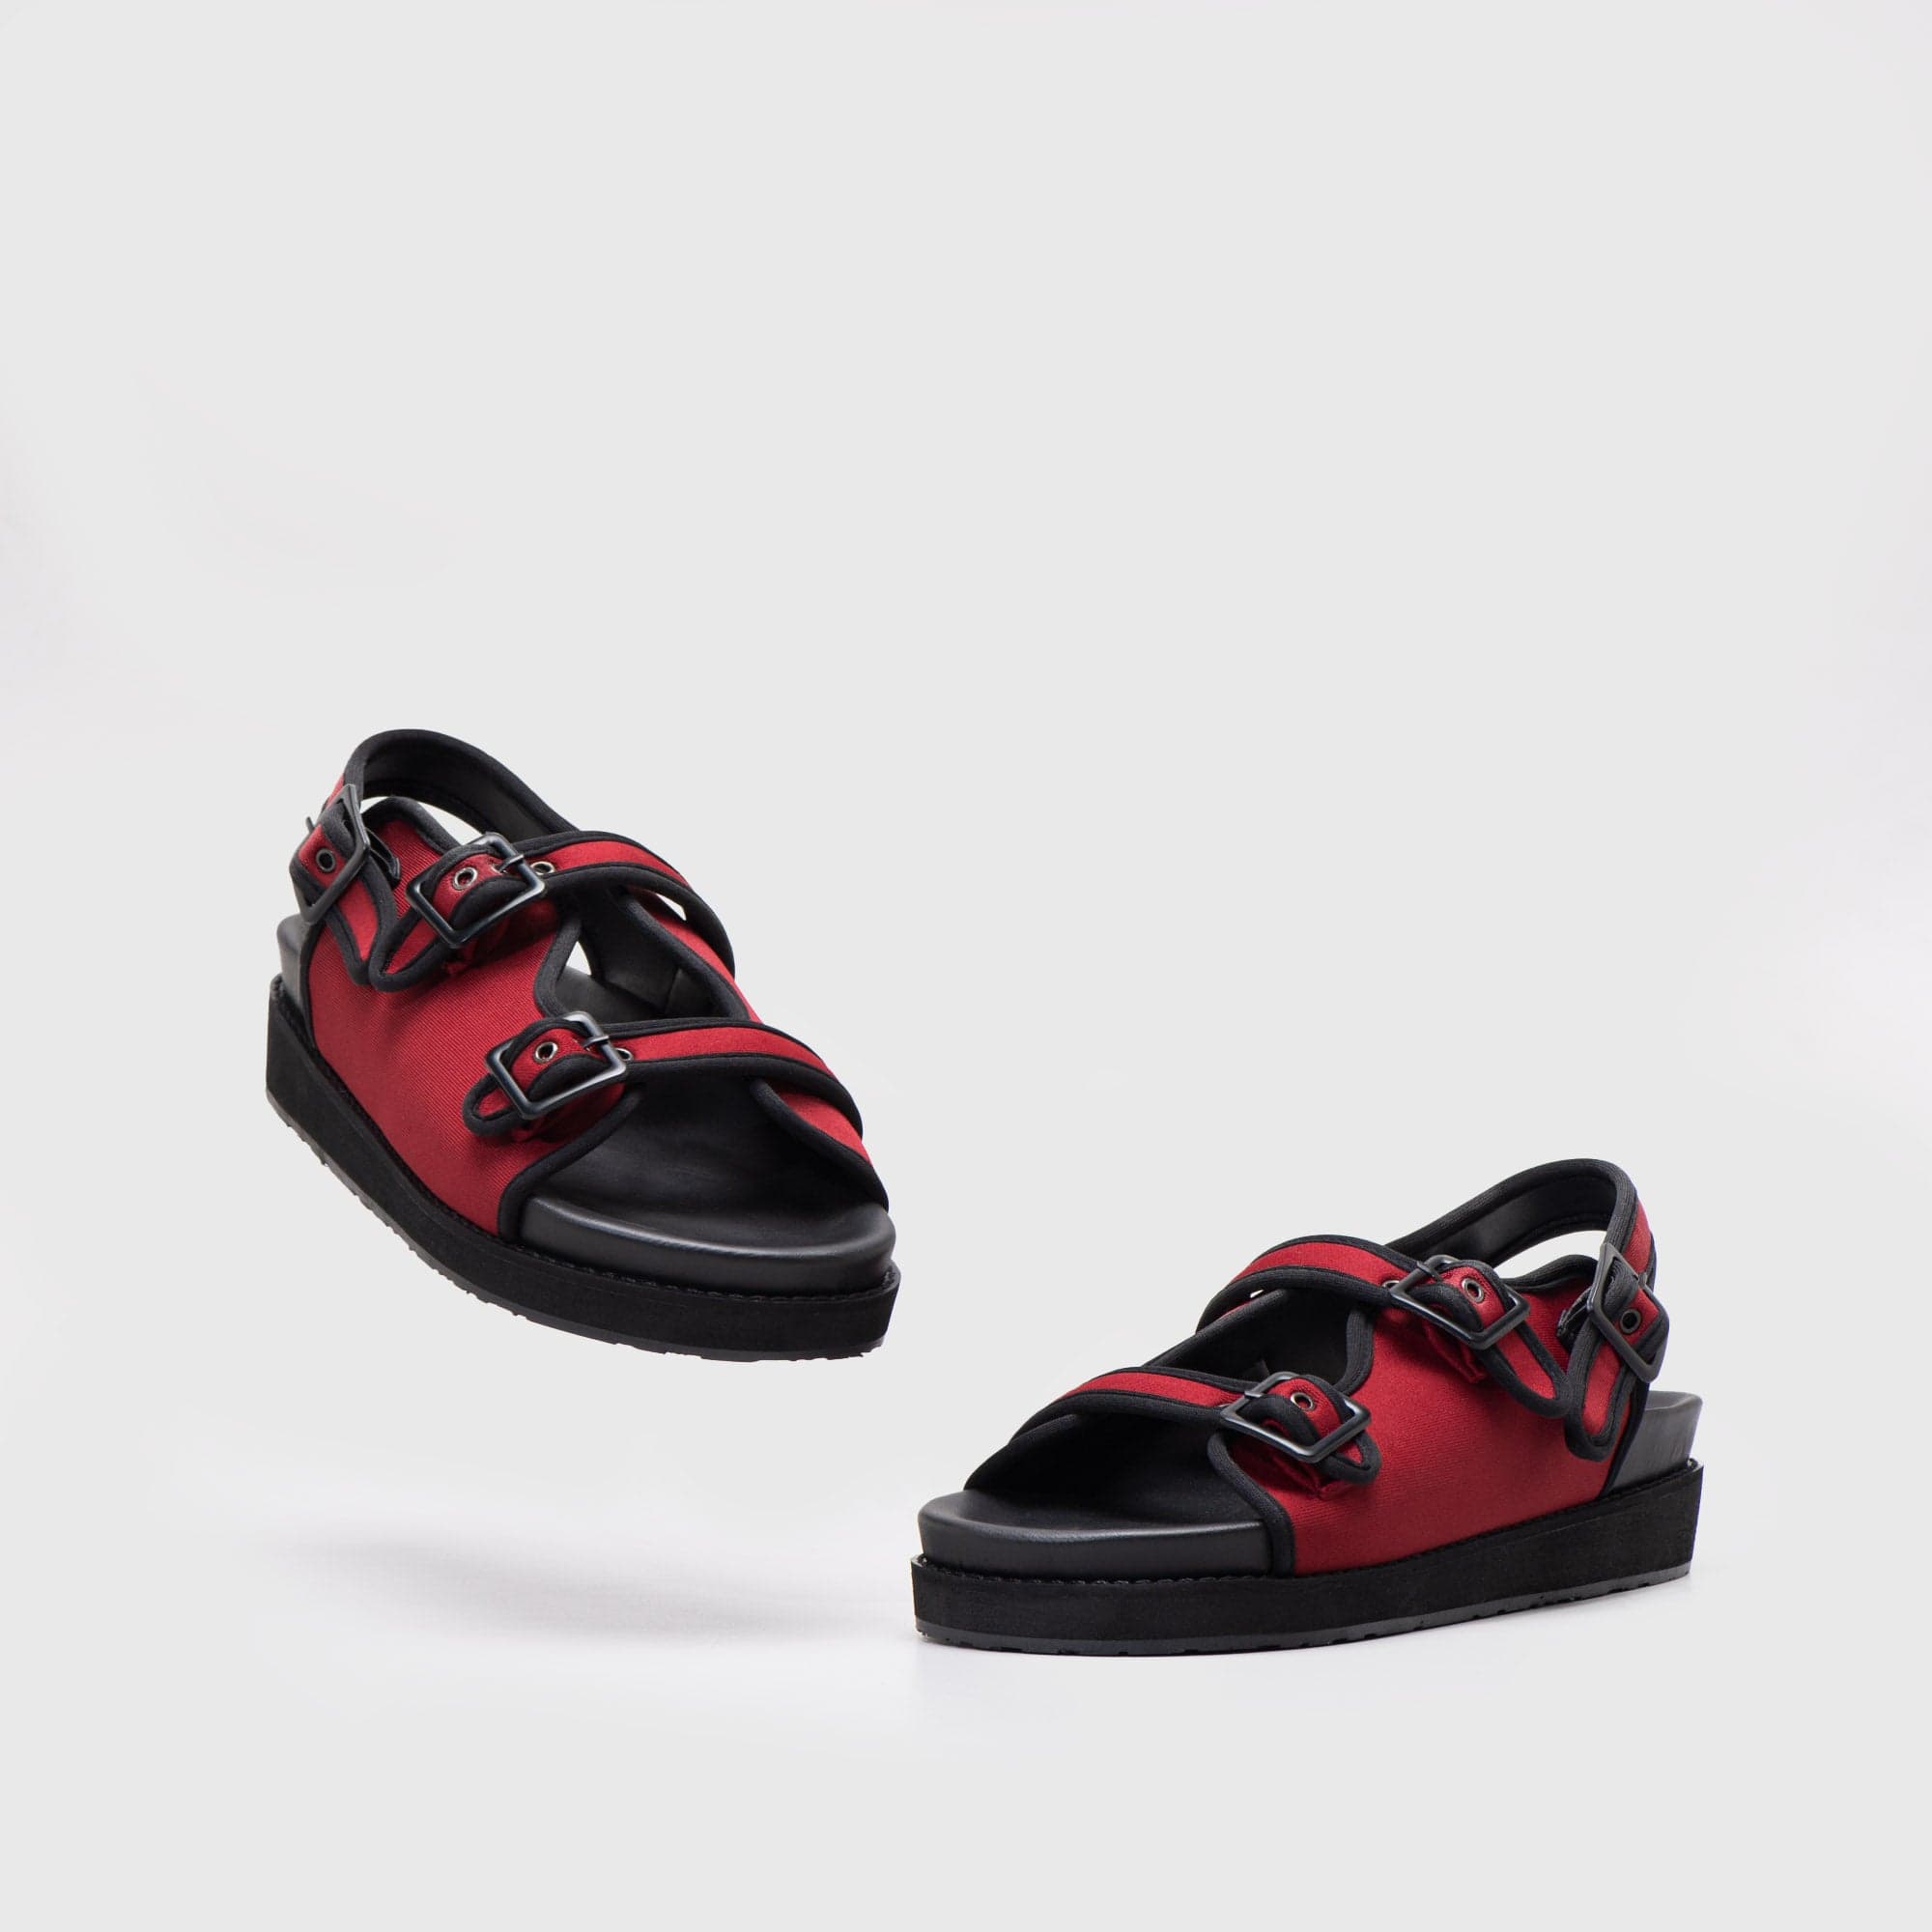 Adorable Projects Official Adorableprojects - Senna Sandals Maroon - Sendal Wanita